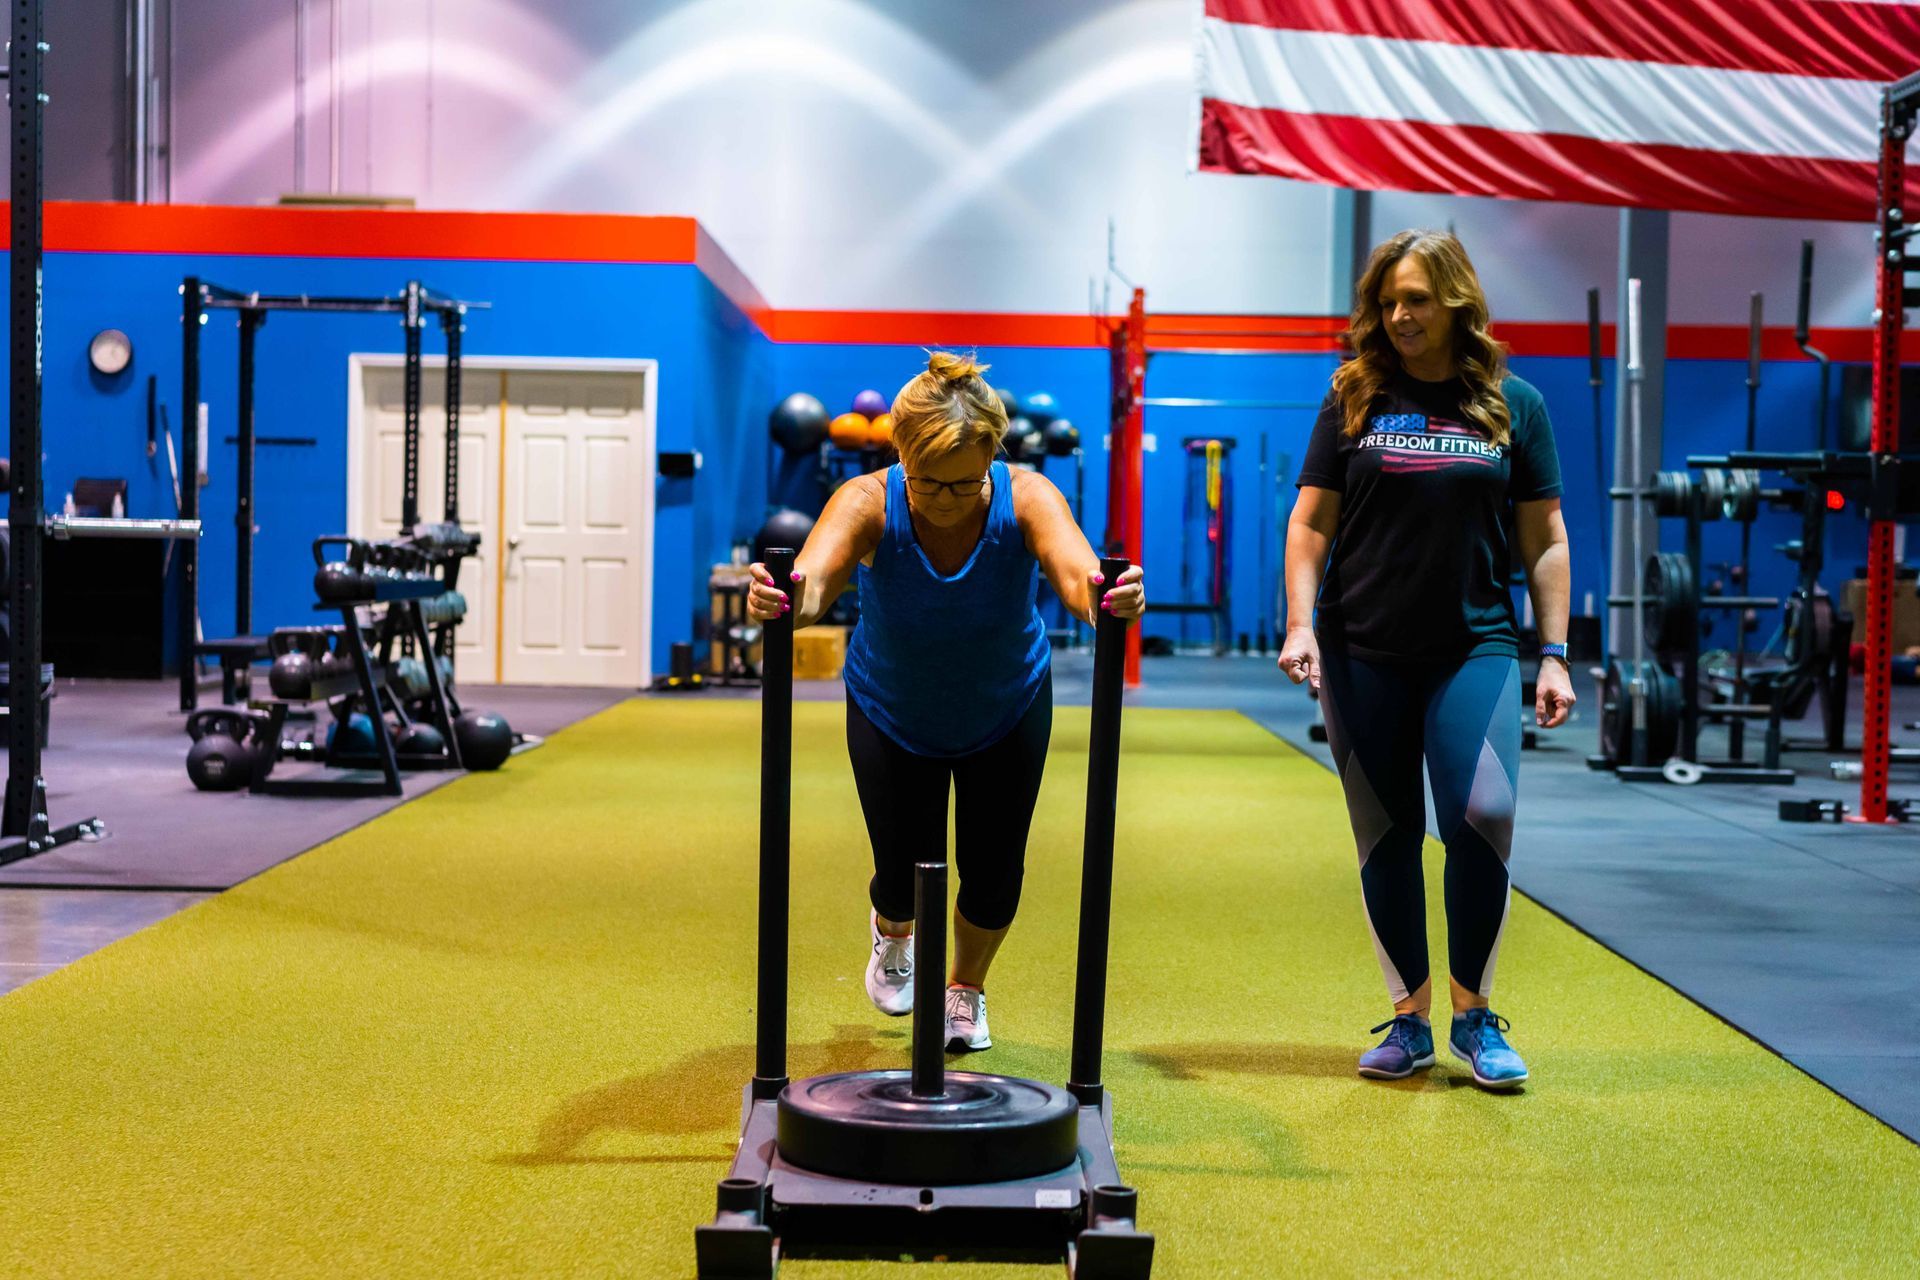 senior personal training at Freedom Fitness Cottleville, MO